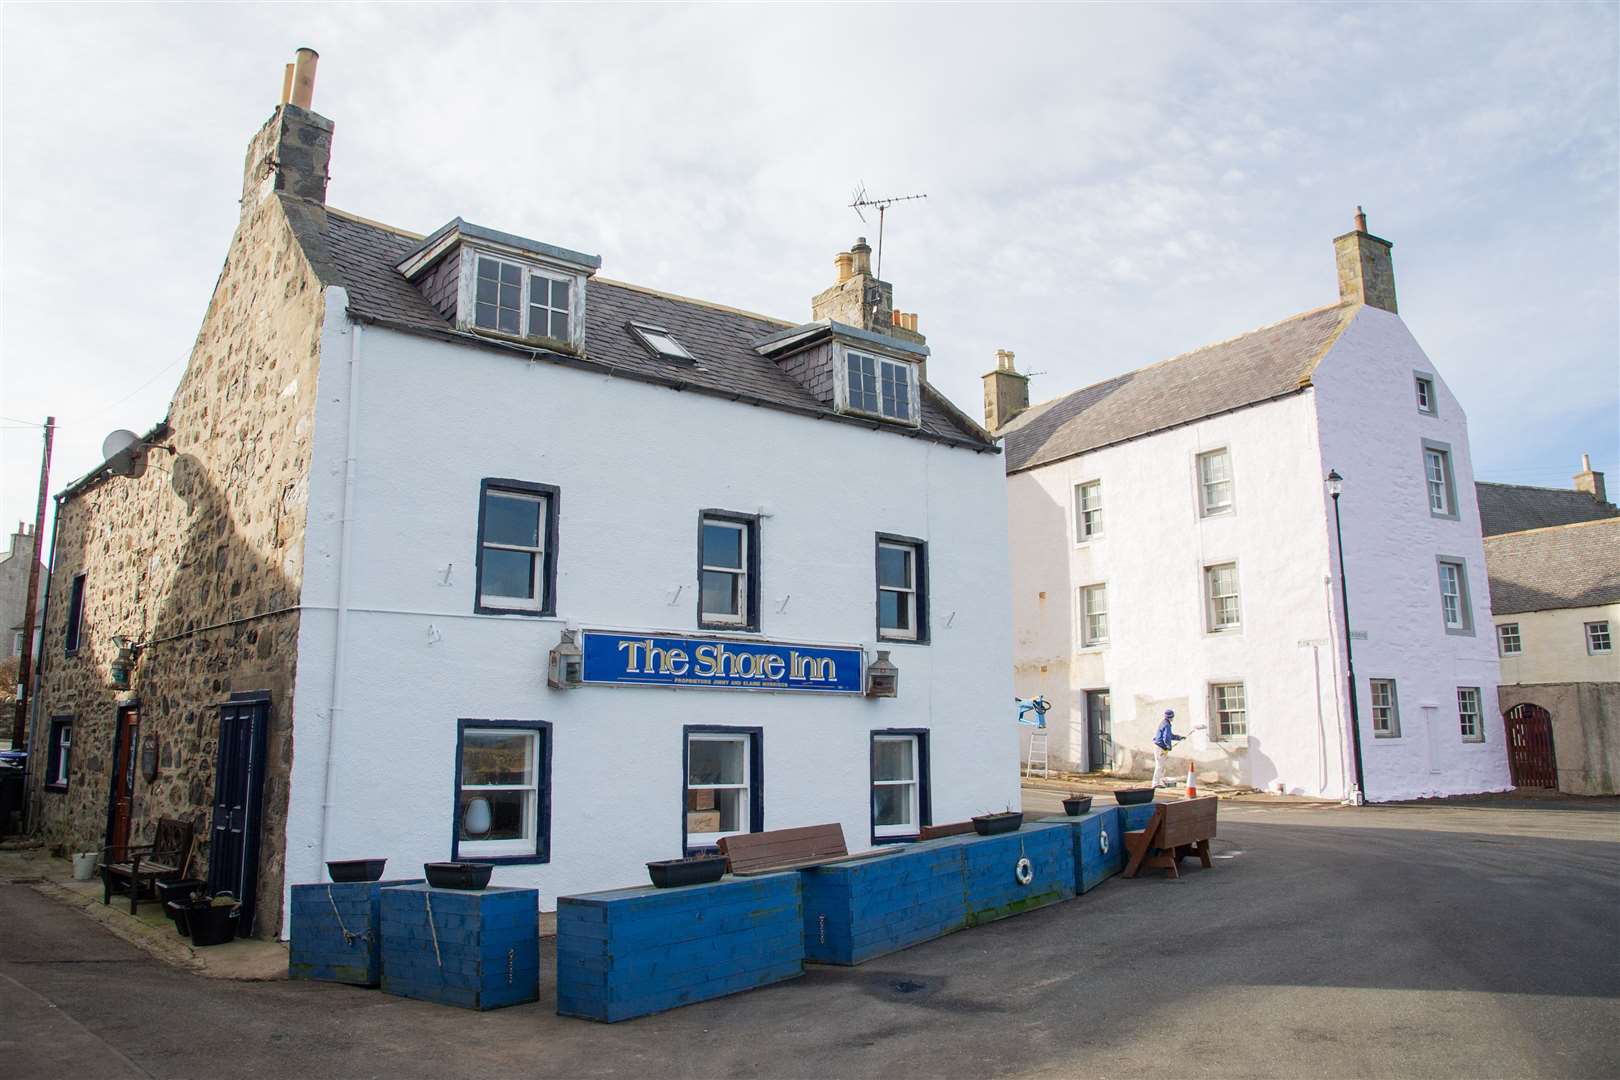 The Shore Inn returns to normal following its appearance as Hotel Lalanne. Picture: Daniel Forsyth